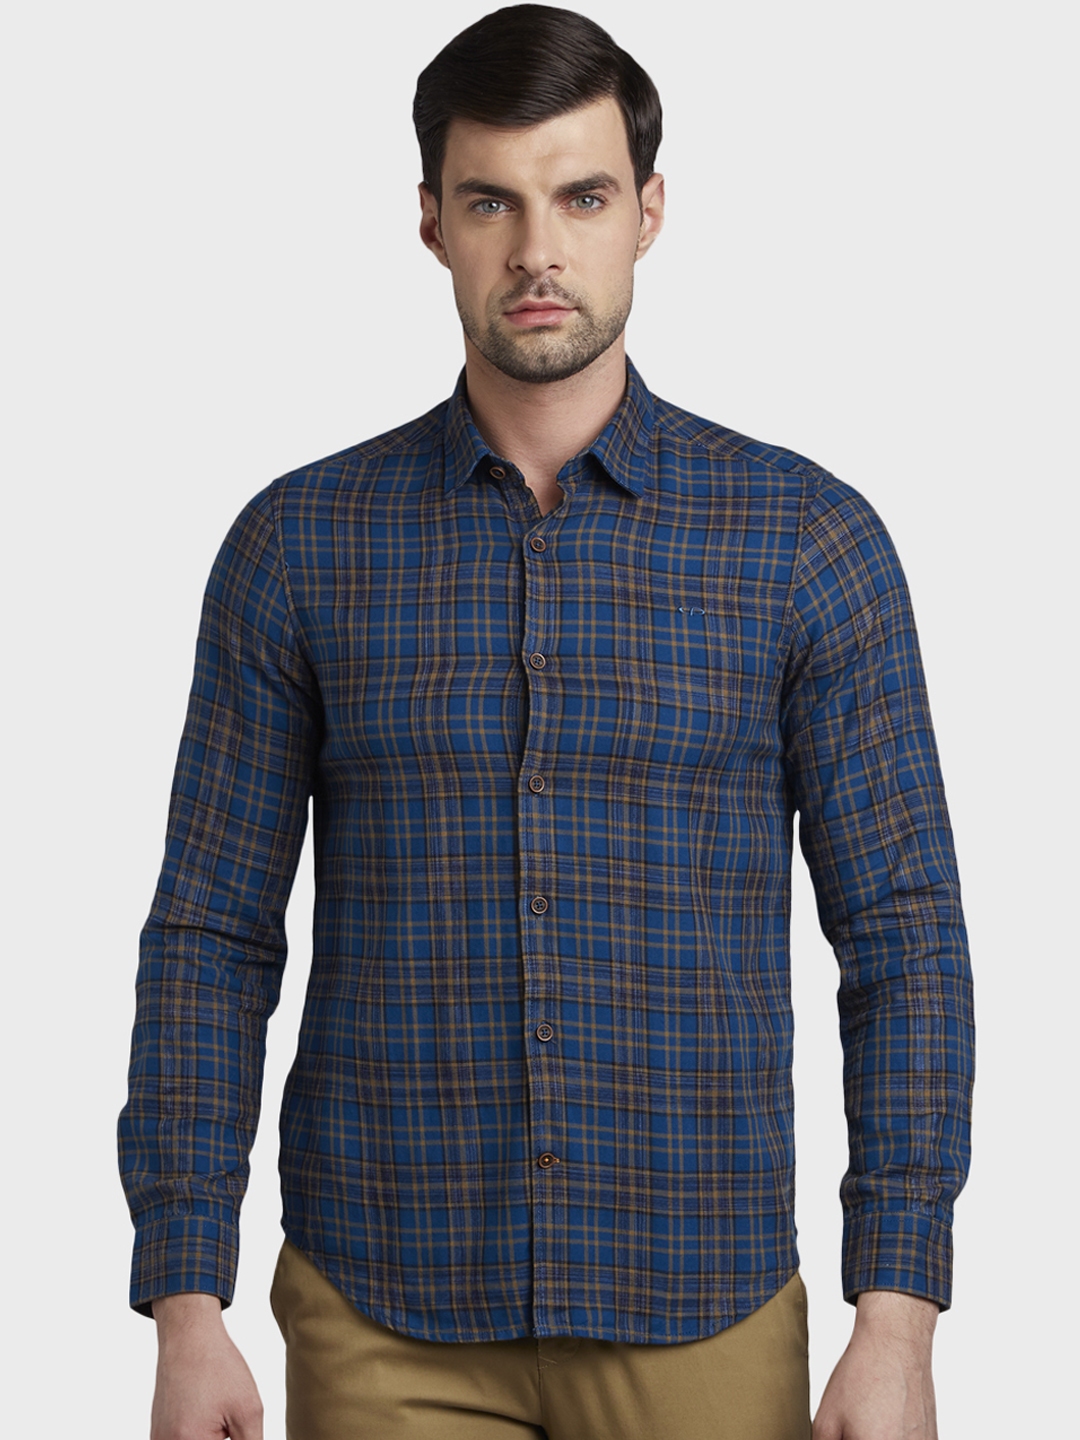 Buy ColorPlus Men Blue & Brown Slim Fit Checked Casual Shirt - Shirts ...